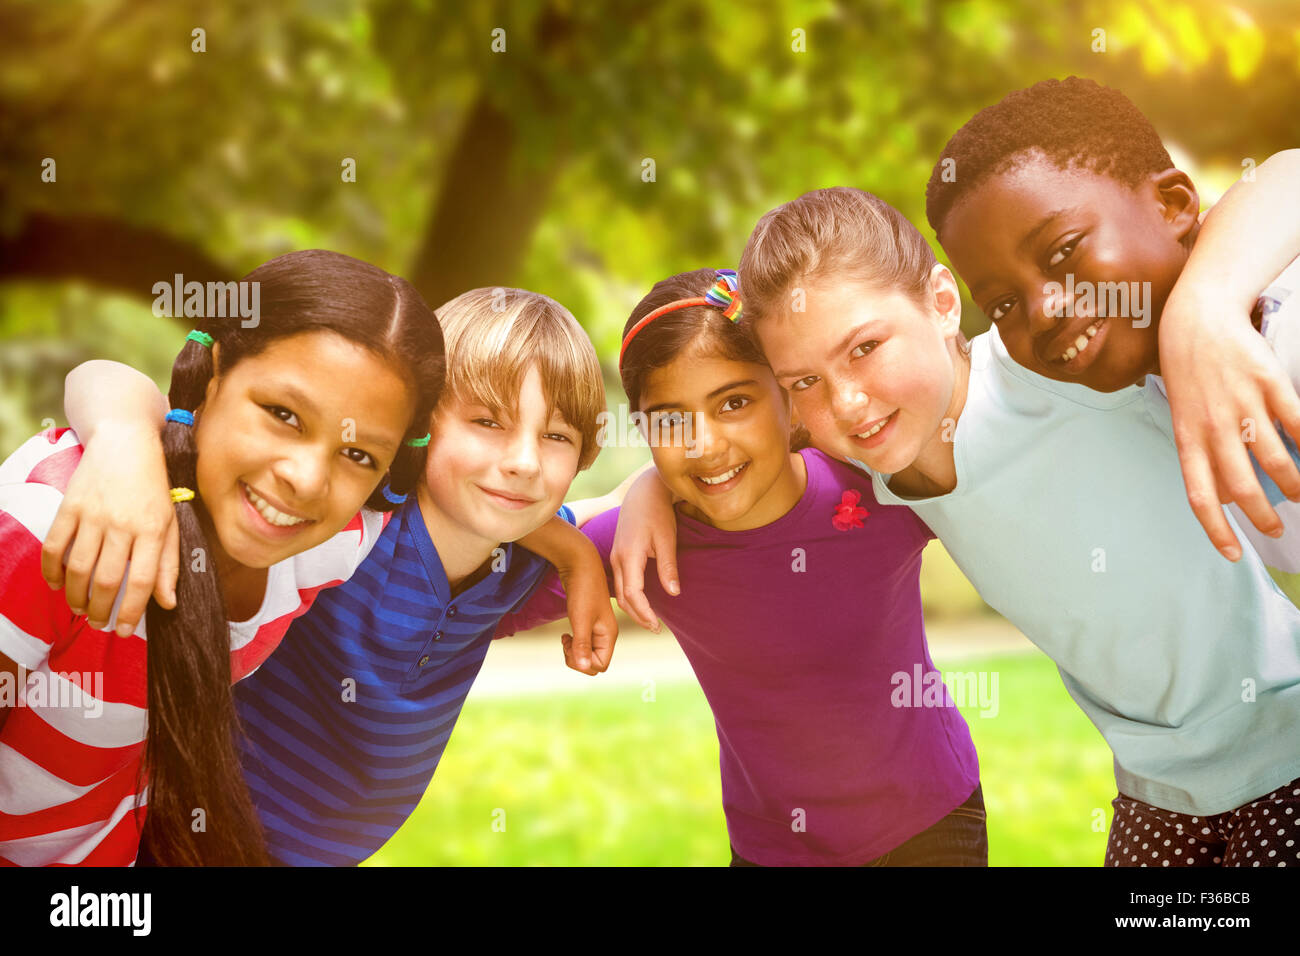 Composite image of happy children forming huddle at park Stock Photo